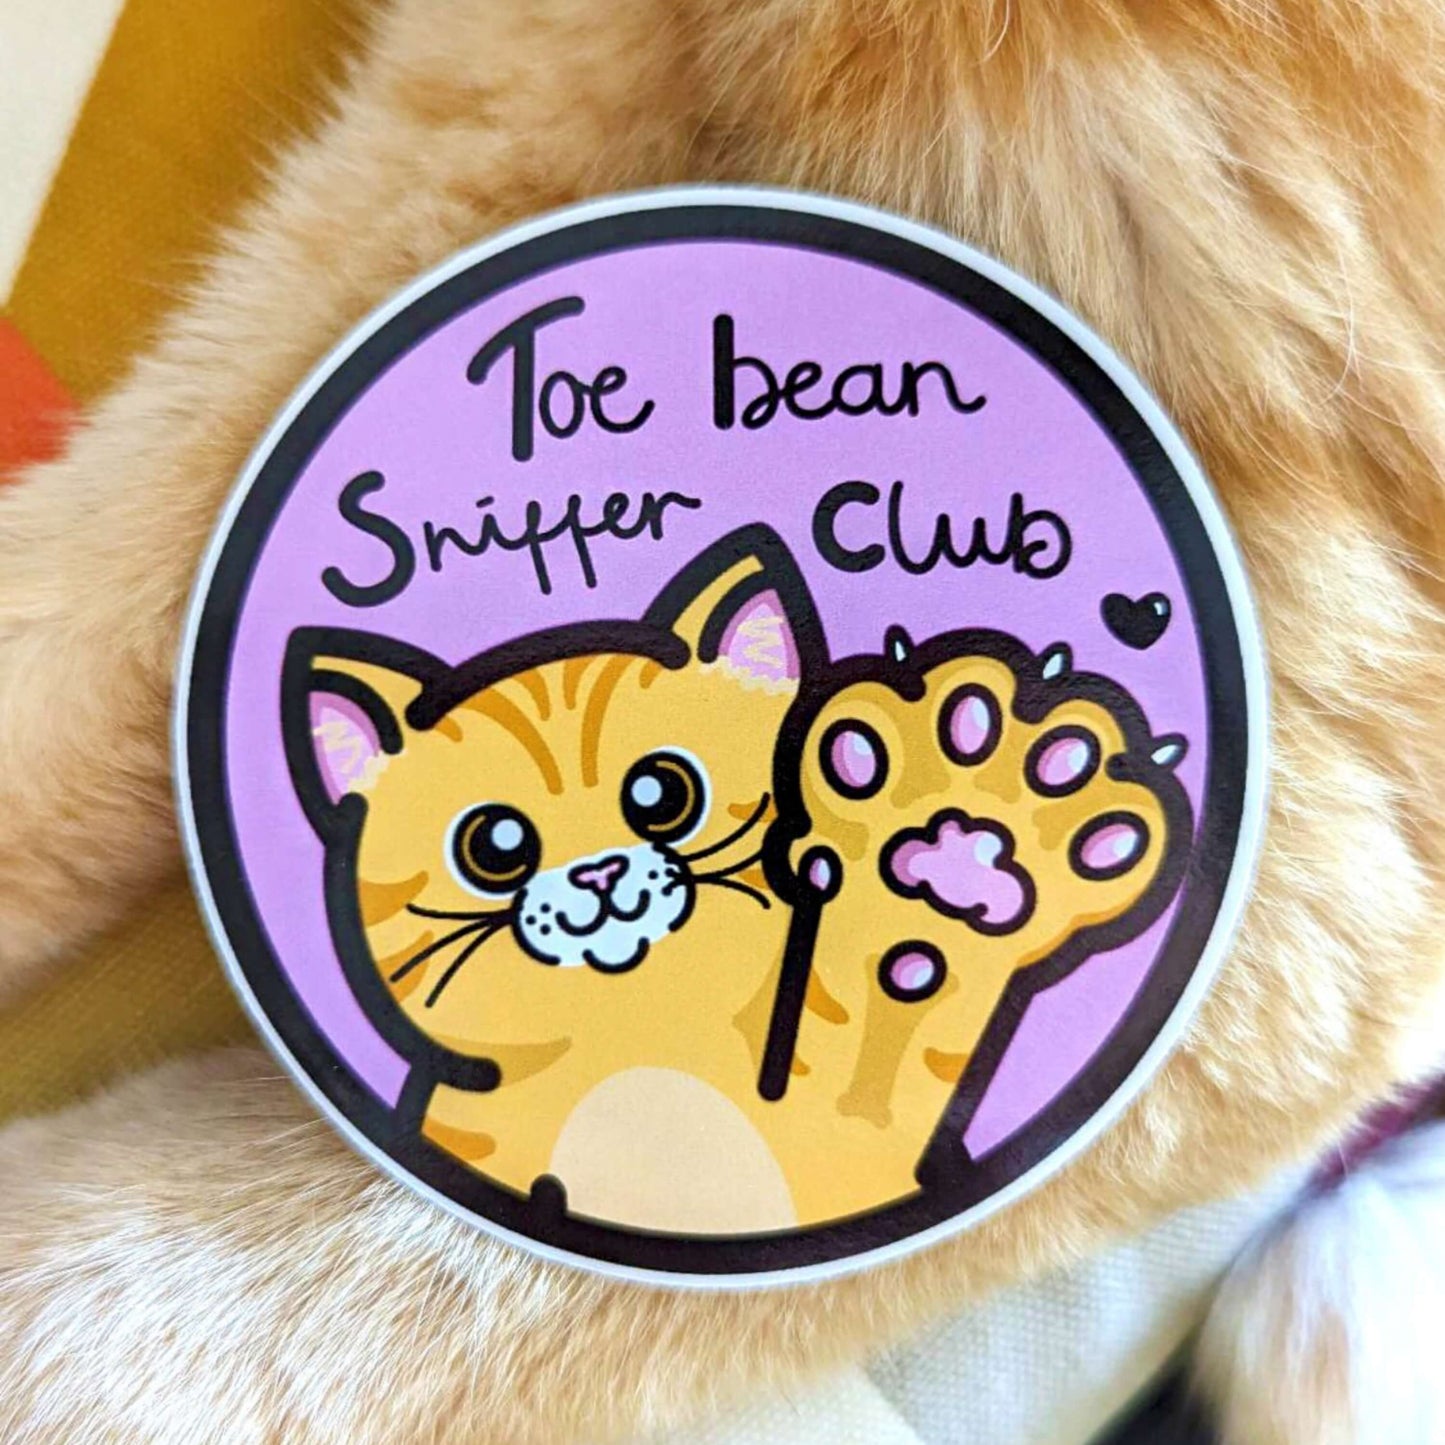 The Toe Bean Sniffer Club Sticker laying on an orange cat. The pastel pink circular sticker has a black outline and black text reading 'toe bean sniffer club' with a smiling orange cat raising a paw with a black heart.